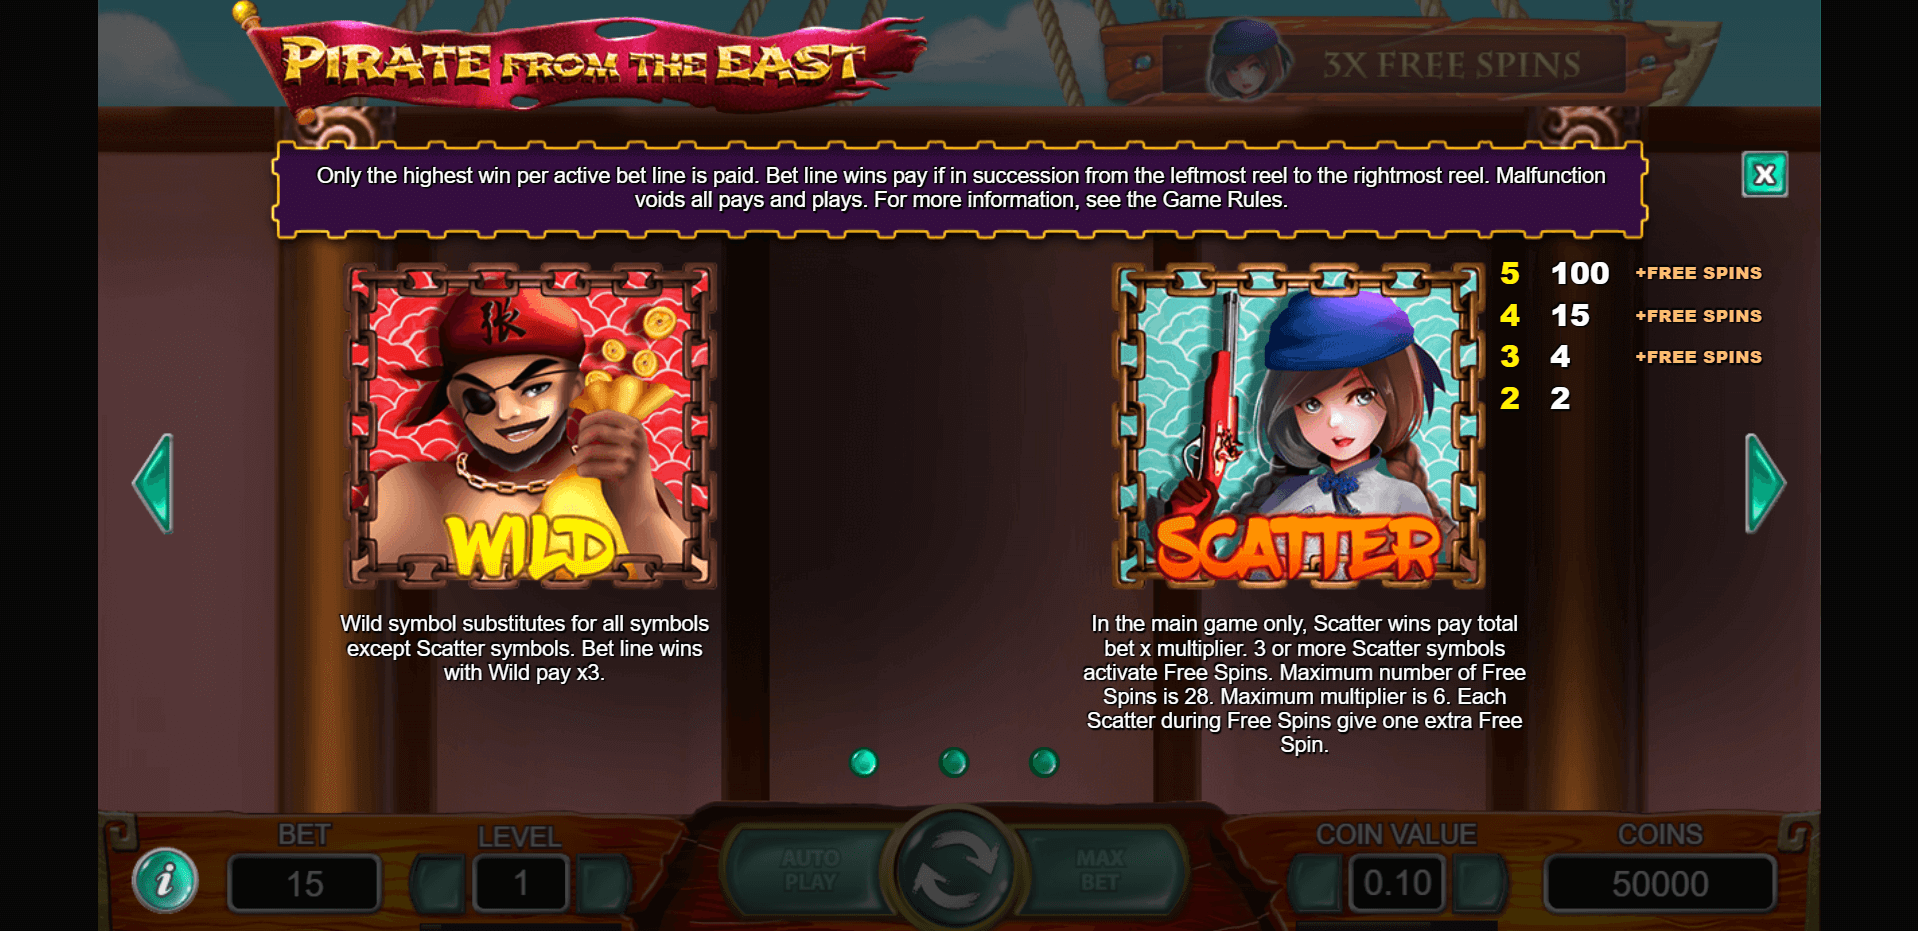 pirate from the east slot machine detail image 0